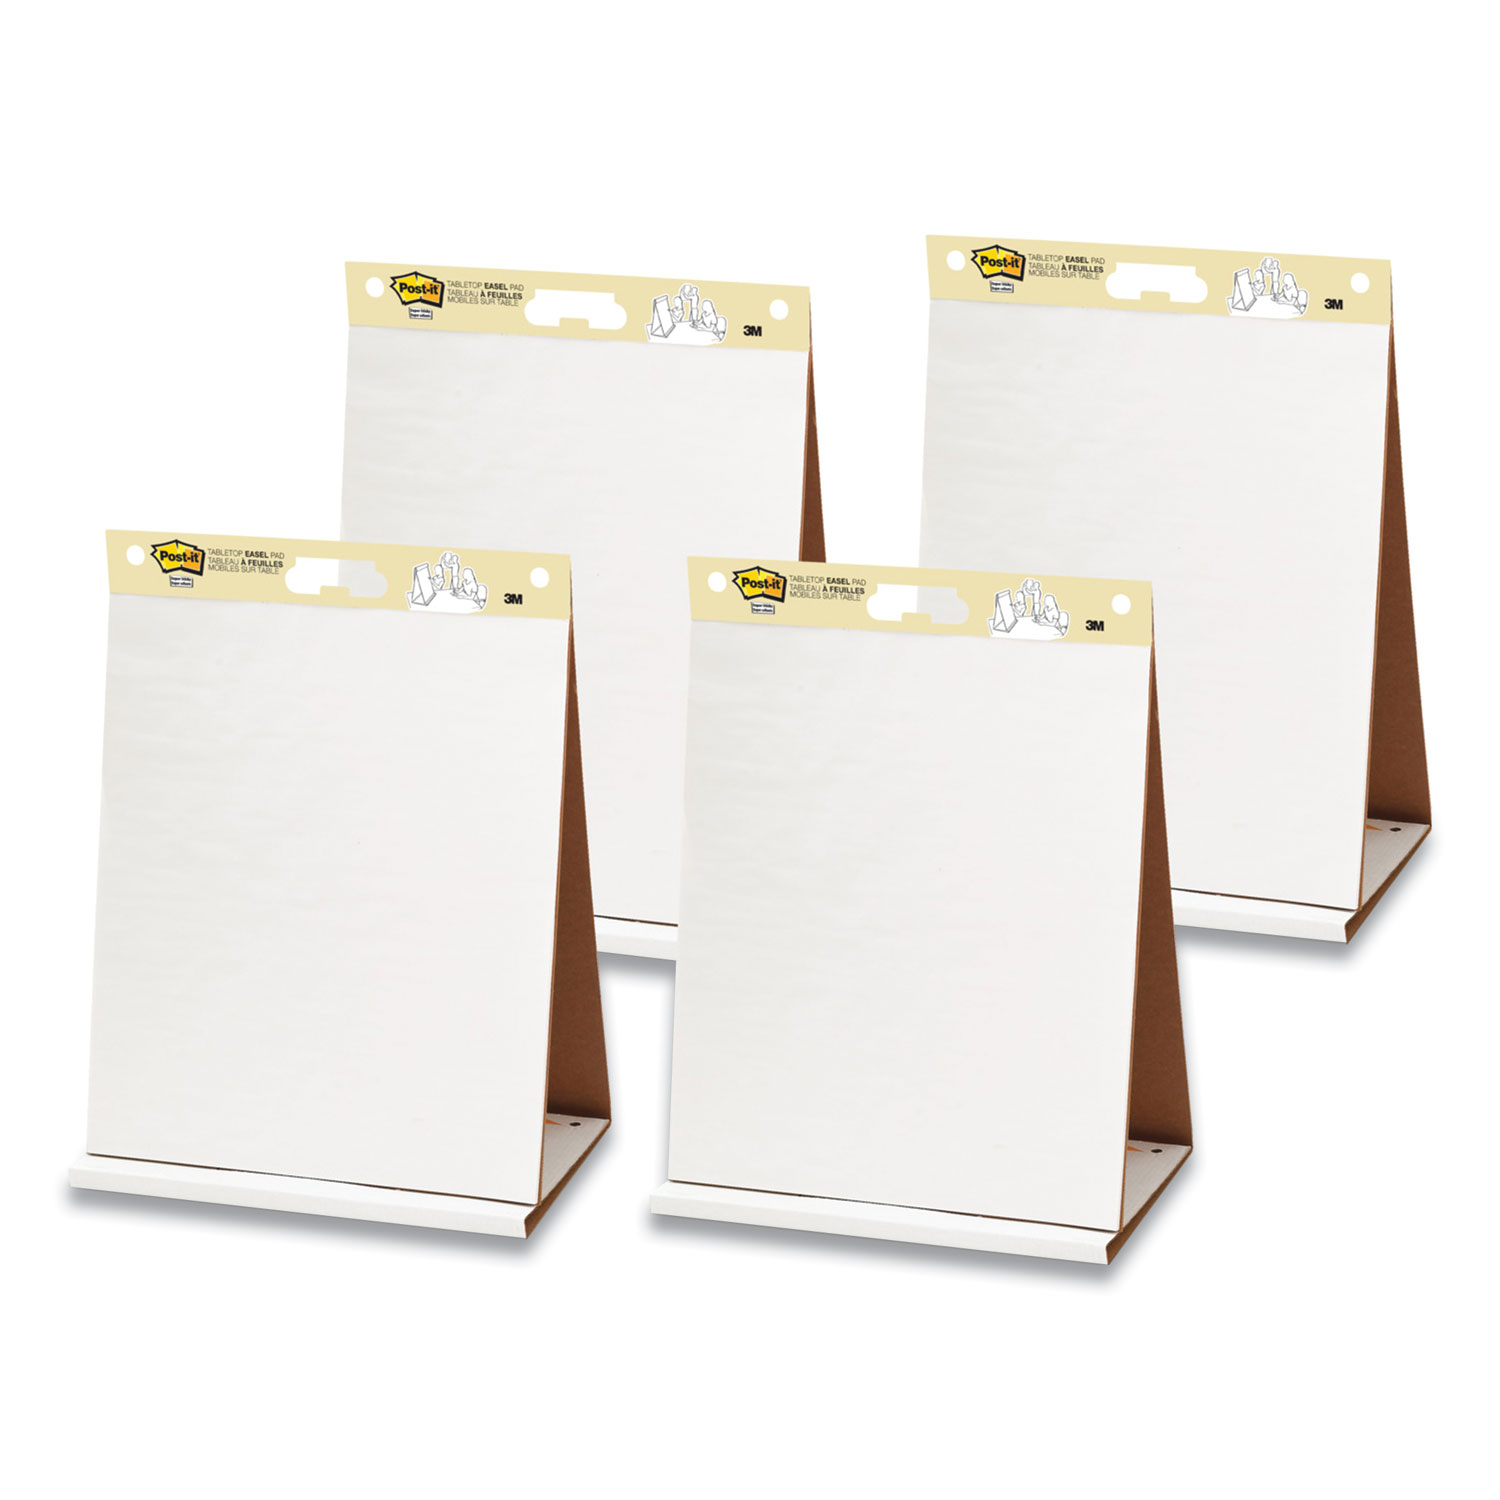  Post-it Easel Pads Super Sticky 563 VAD 4PK Self-Stick Tabletop Easel Pad, 20 x 23, White, 20 Sheets, 4/Pack (MMM24343770) 